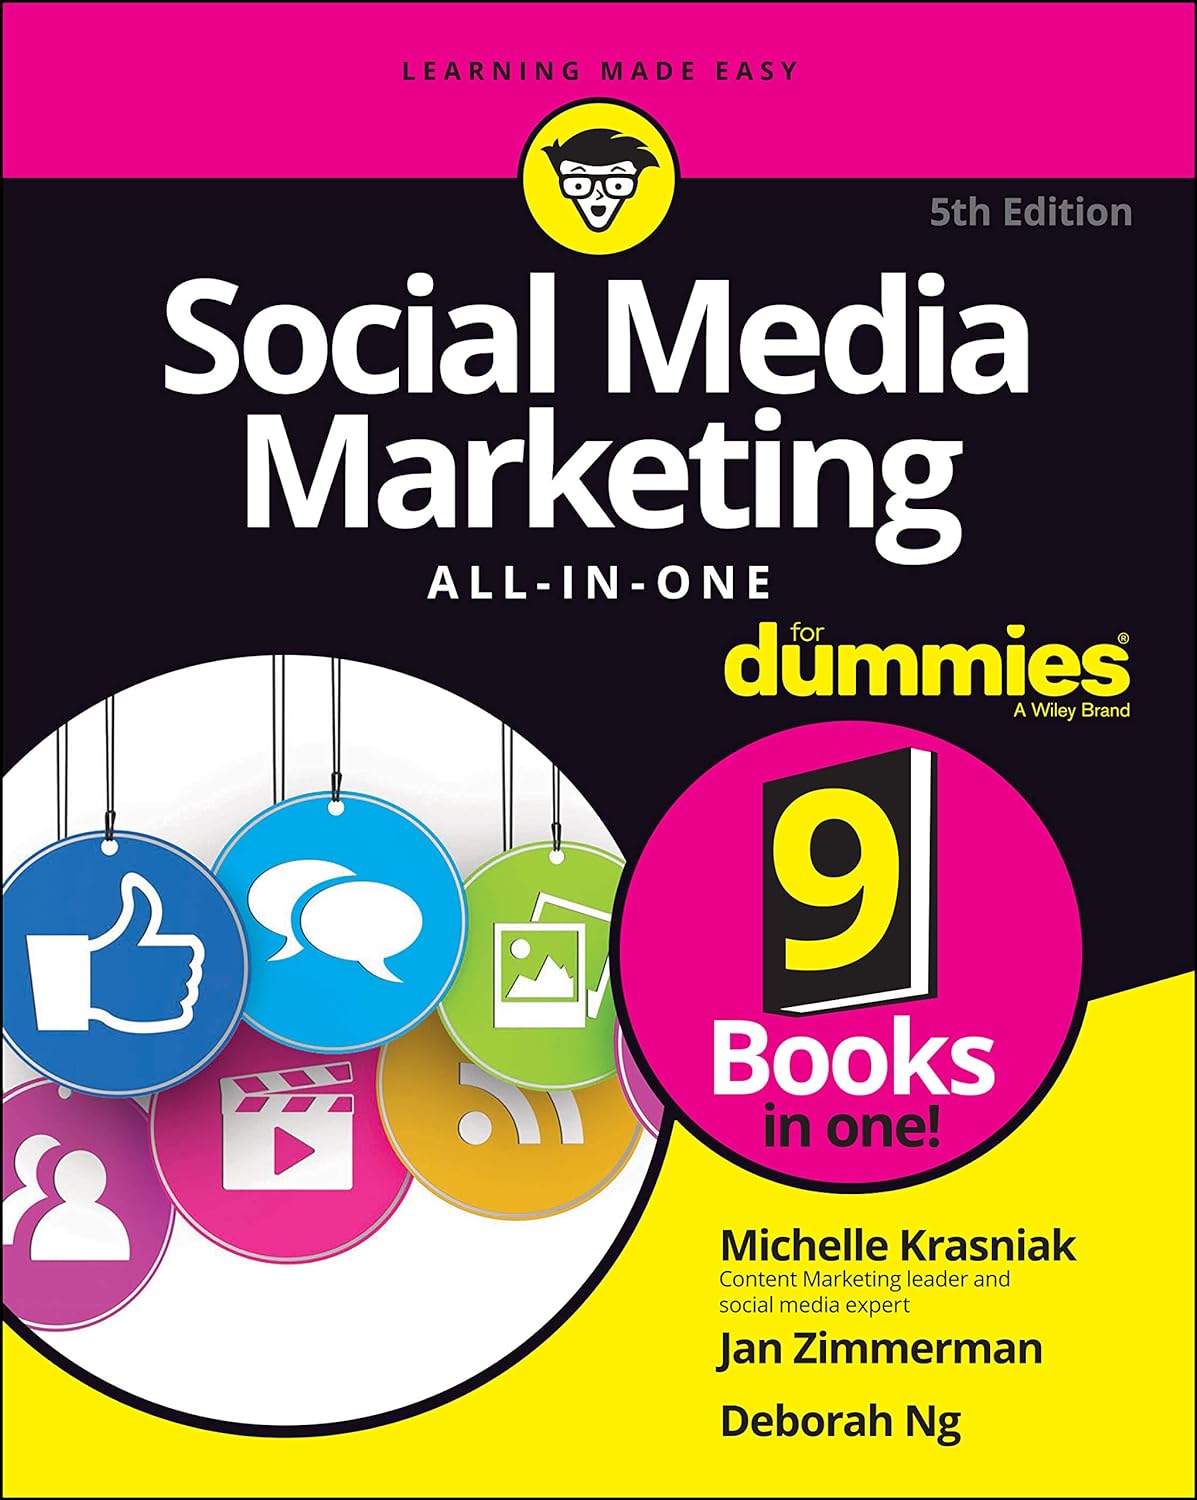 Social Media Marketing All-in-One For Dummies, 5th Edition Review